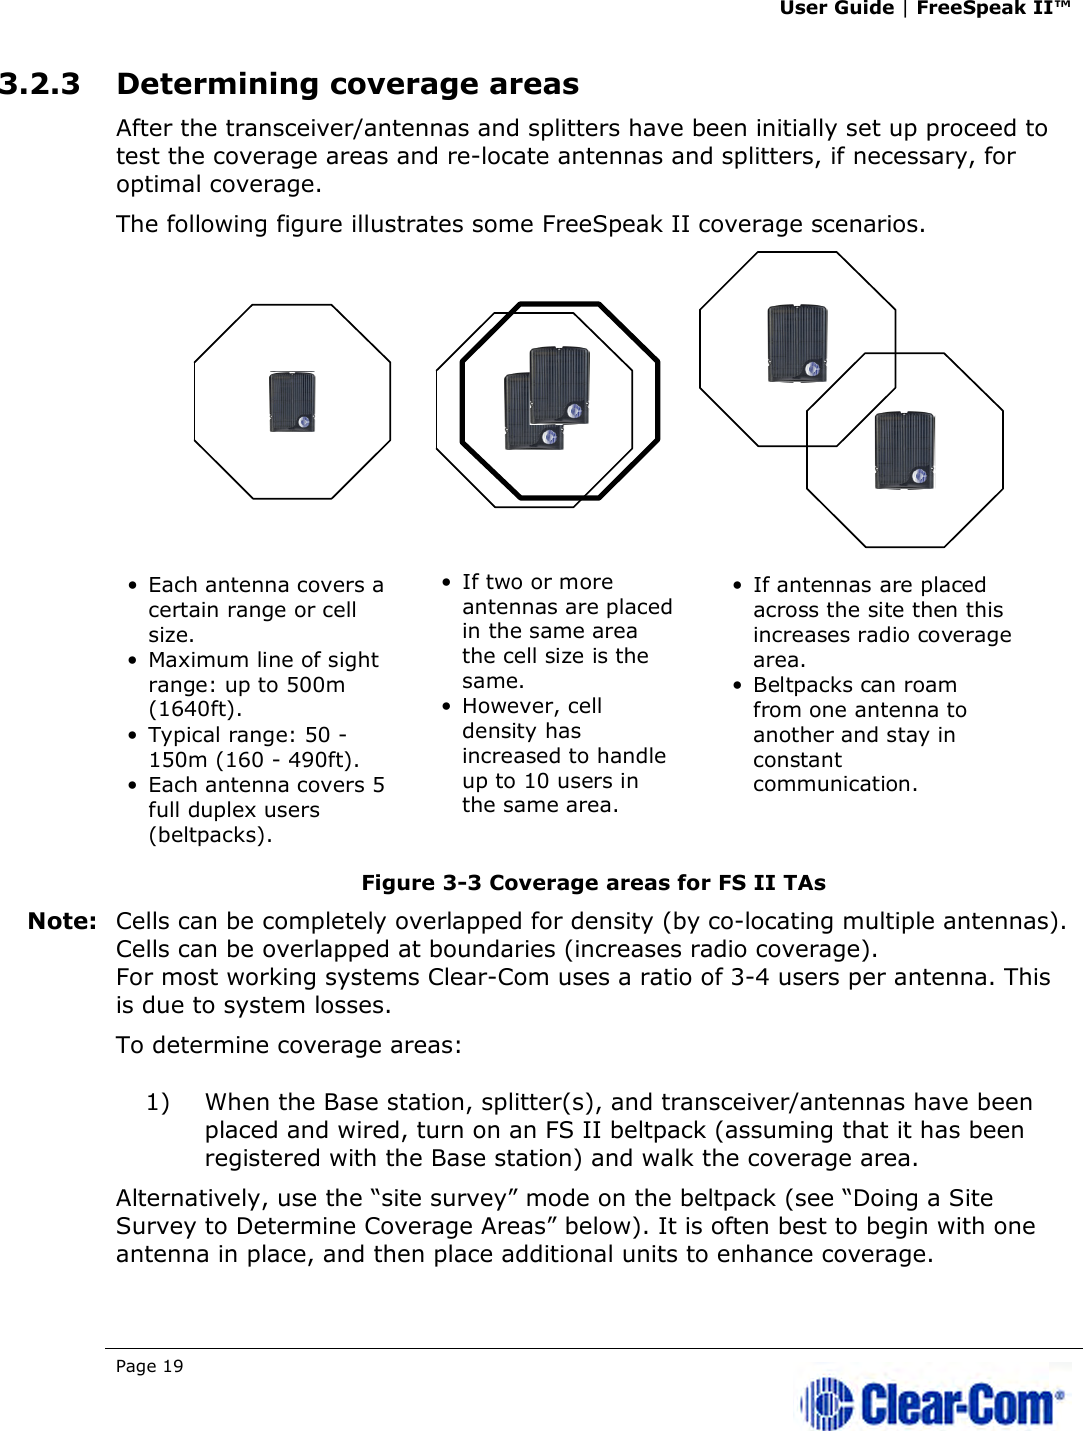 User Guide | FreeSpeak II™  Page 19   3.2.3 Determining coverage areas After the transceiver/antennas and splitters have been initially set up proceed to test the coverage areas and re-locate antennas and splitters, if necessary, for optimal coverage. The following figure illustrates some FreeSpeak II coverage scenarios.  Figure 3-3 Coverage areas for FS II TAs Note: Cells can be completely overlapped for density (by co-locating multiple antennas). Cells can be overlapped at boundaries (increases radio coverage). For most working systems Clear-Com uses a ratio of 3-4 users per antenna. This is due to system losses. To determine coverage areas:  1) When the Base station, splitter(s), and transceiver/antennas have been placed and wired, turn on an FS II beltpack (assuming that it has been registered with the Base station) and walk the coverage area. Alternatively, use the “site survey” mode on the beltpack (see “Doing a Site Survey to Determine Coverage Areas” below). It is often best to begin with one antenna in place, and then place additional units to enhance coverage.  •  Each antenna covers a certain range or cell size.•  Maximum line of sight range: up to 500m (1640ft). •  Typical range: 50 - 150m (160 - 490ft). •  Each antenna covers 5 full duplex users (beltpacks).•  If two or more antennas are placed in the same area the cell size is the same.•  However, cell density has increased to handle up to 10 users in the same area.•  If antennas are placed across the site then this increases radio coverage area.•  Beltpacks can roam from one antenna to another and stay in constant communication. 